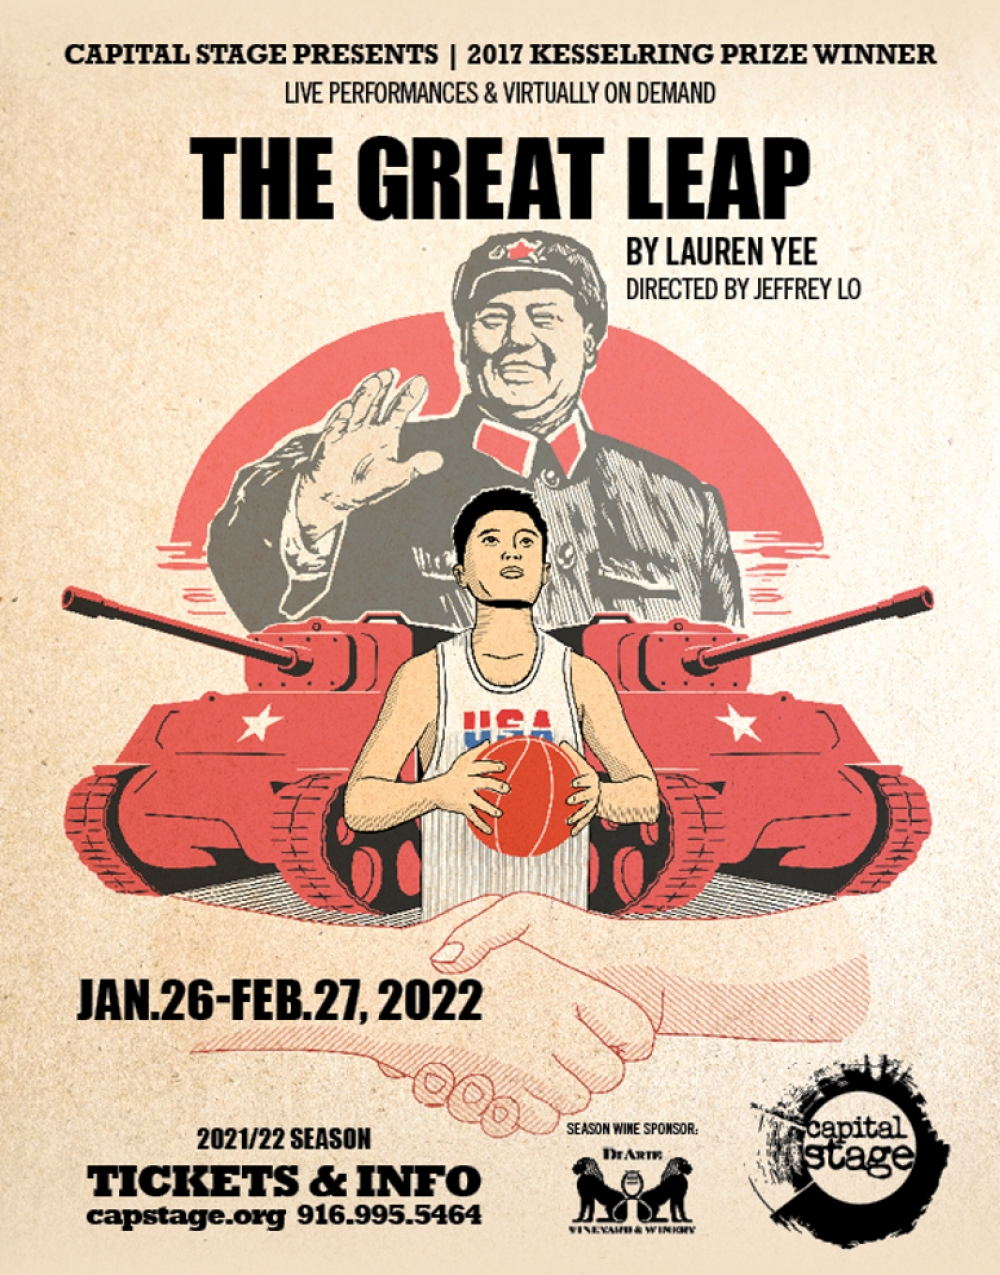 The Great Leap at Capital Stage